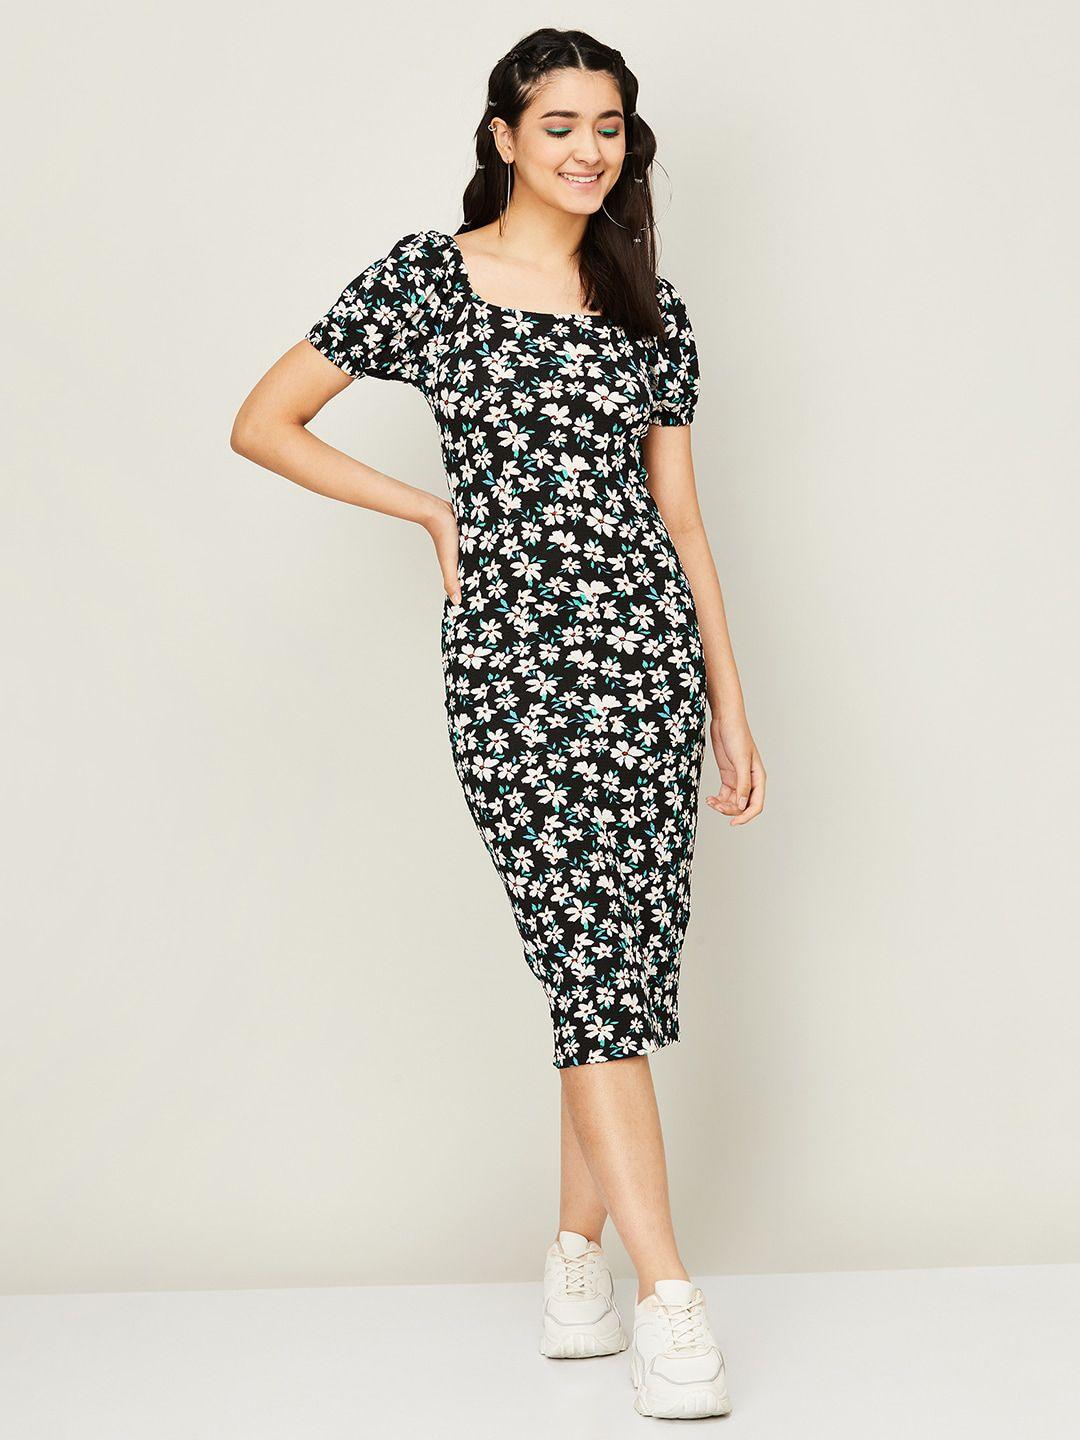 ginger-by-lifestyle-floral-printed-sheath-midi-dress